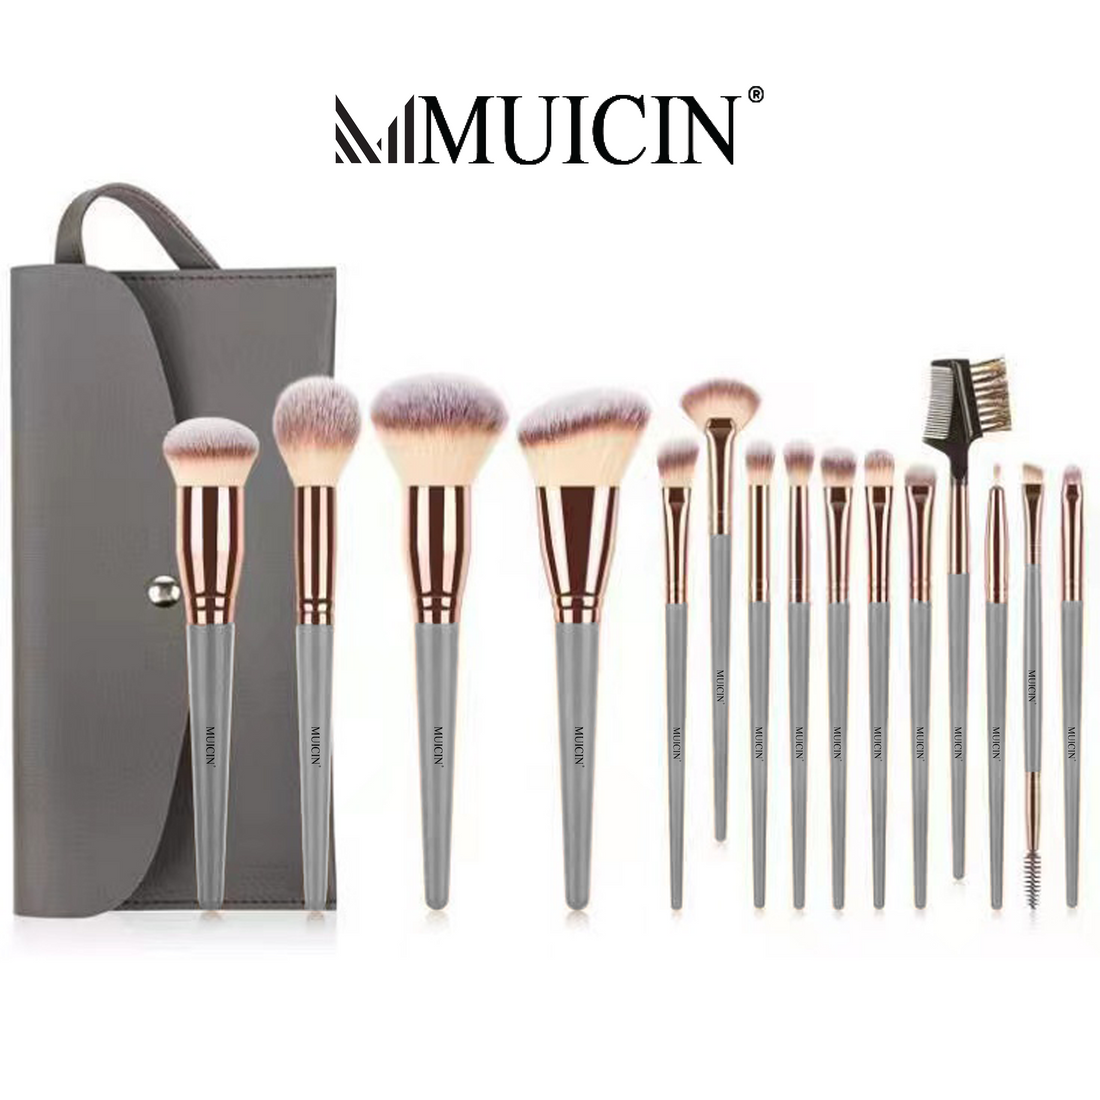 BLACK &amp; SILVER MAKEUP BRUSH COLLECTION - 13 PIECES FOR PRECISION APPLICATION